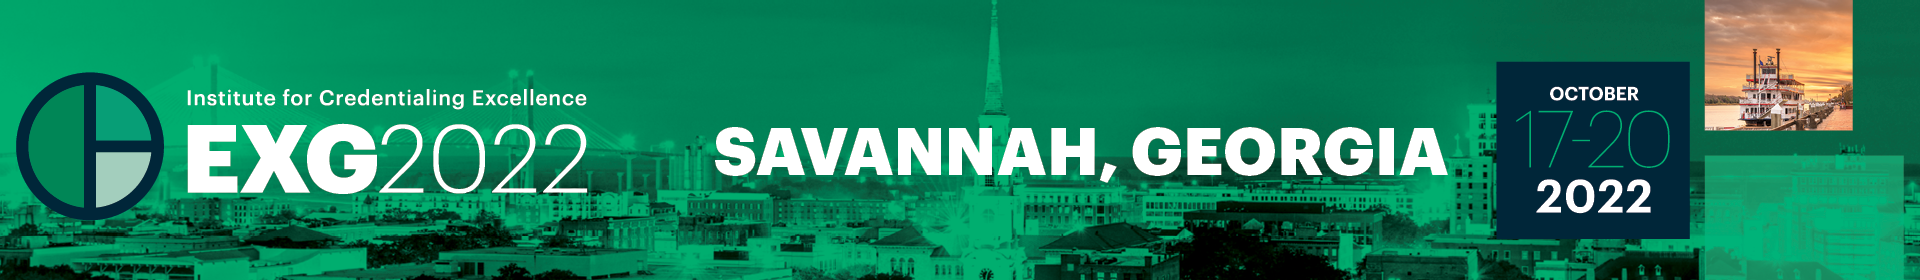 I.C.E. Exchange Banner, a green banner highlighting the 2022 conference, which will be held October 17 through 20 in Savannah Georgia